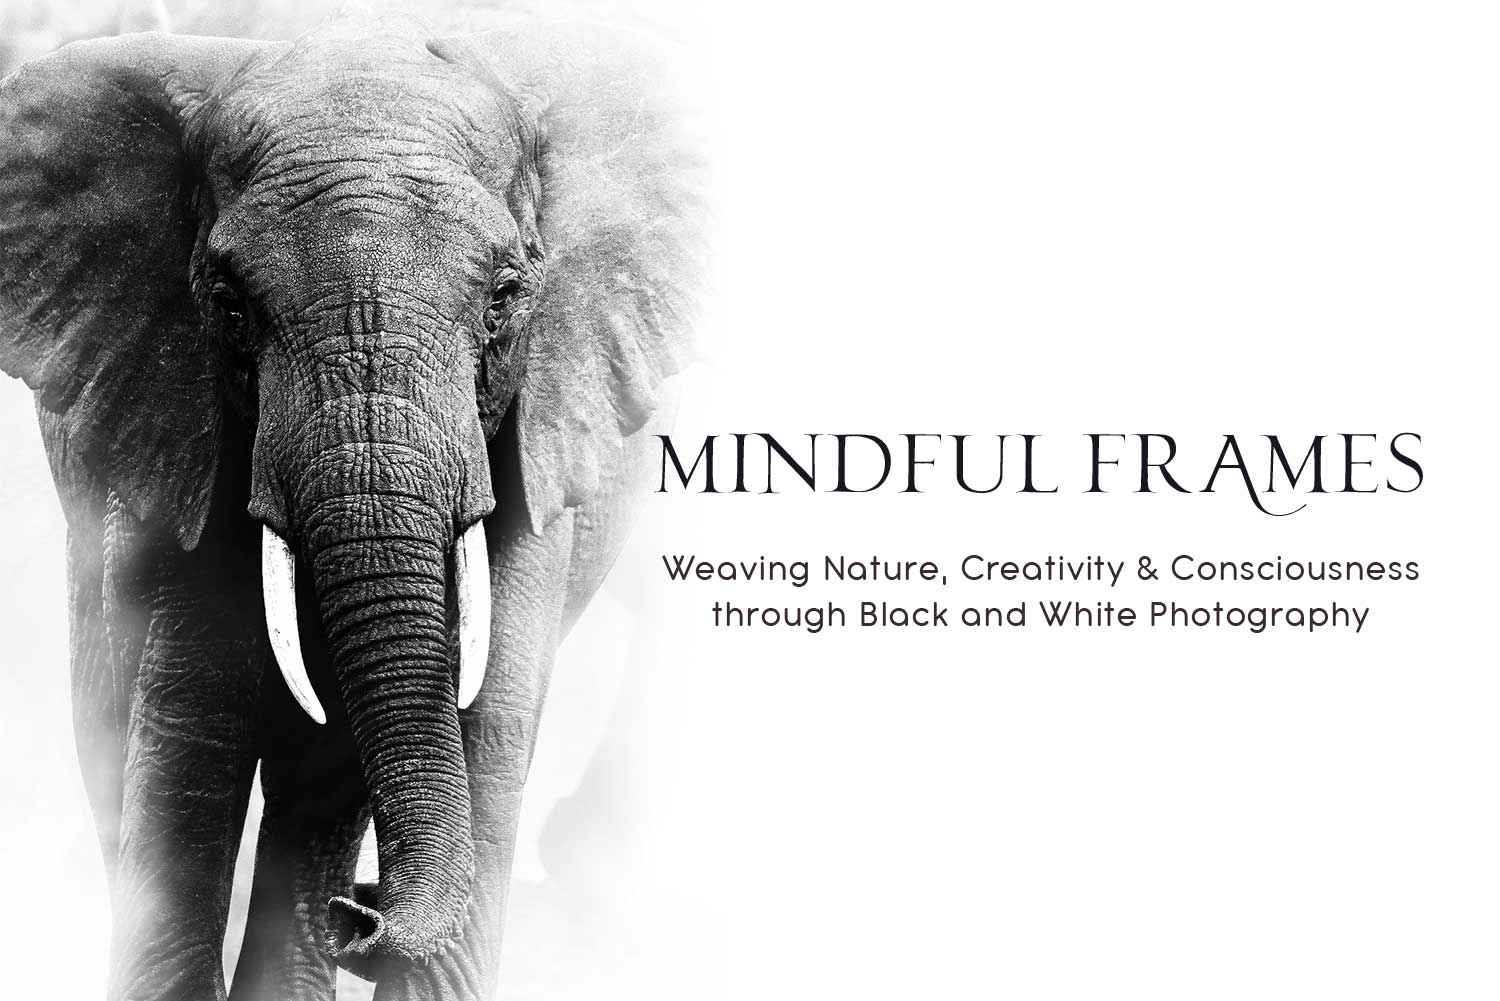 Mindful Frames: Weaving Nature, Creativity & Consciousness through Black and White Photography